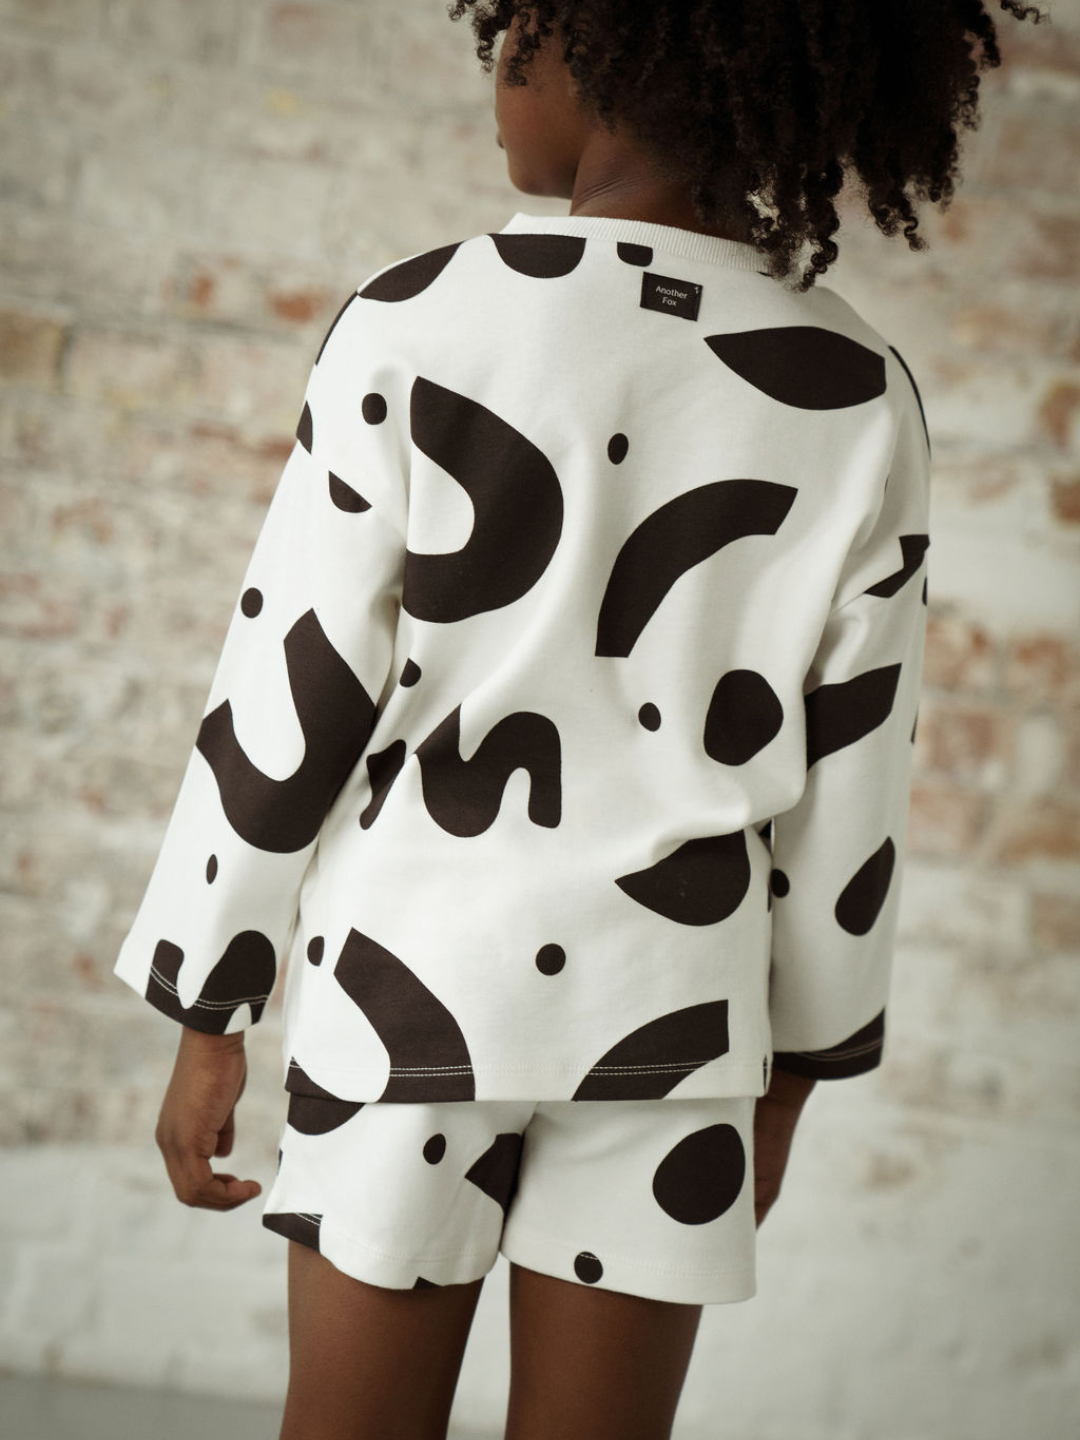 A child wearing a kids' long-sleeved tee shirt in a pattern of black squiggles and dots on a white background, with matching short, back view